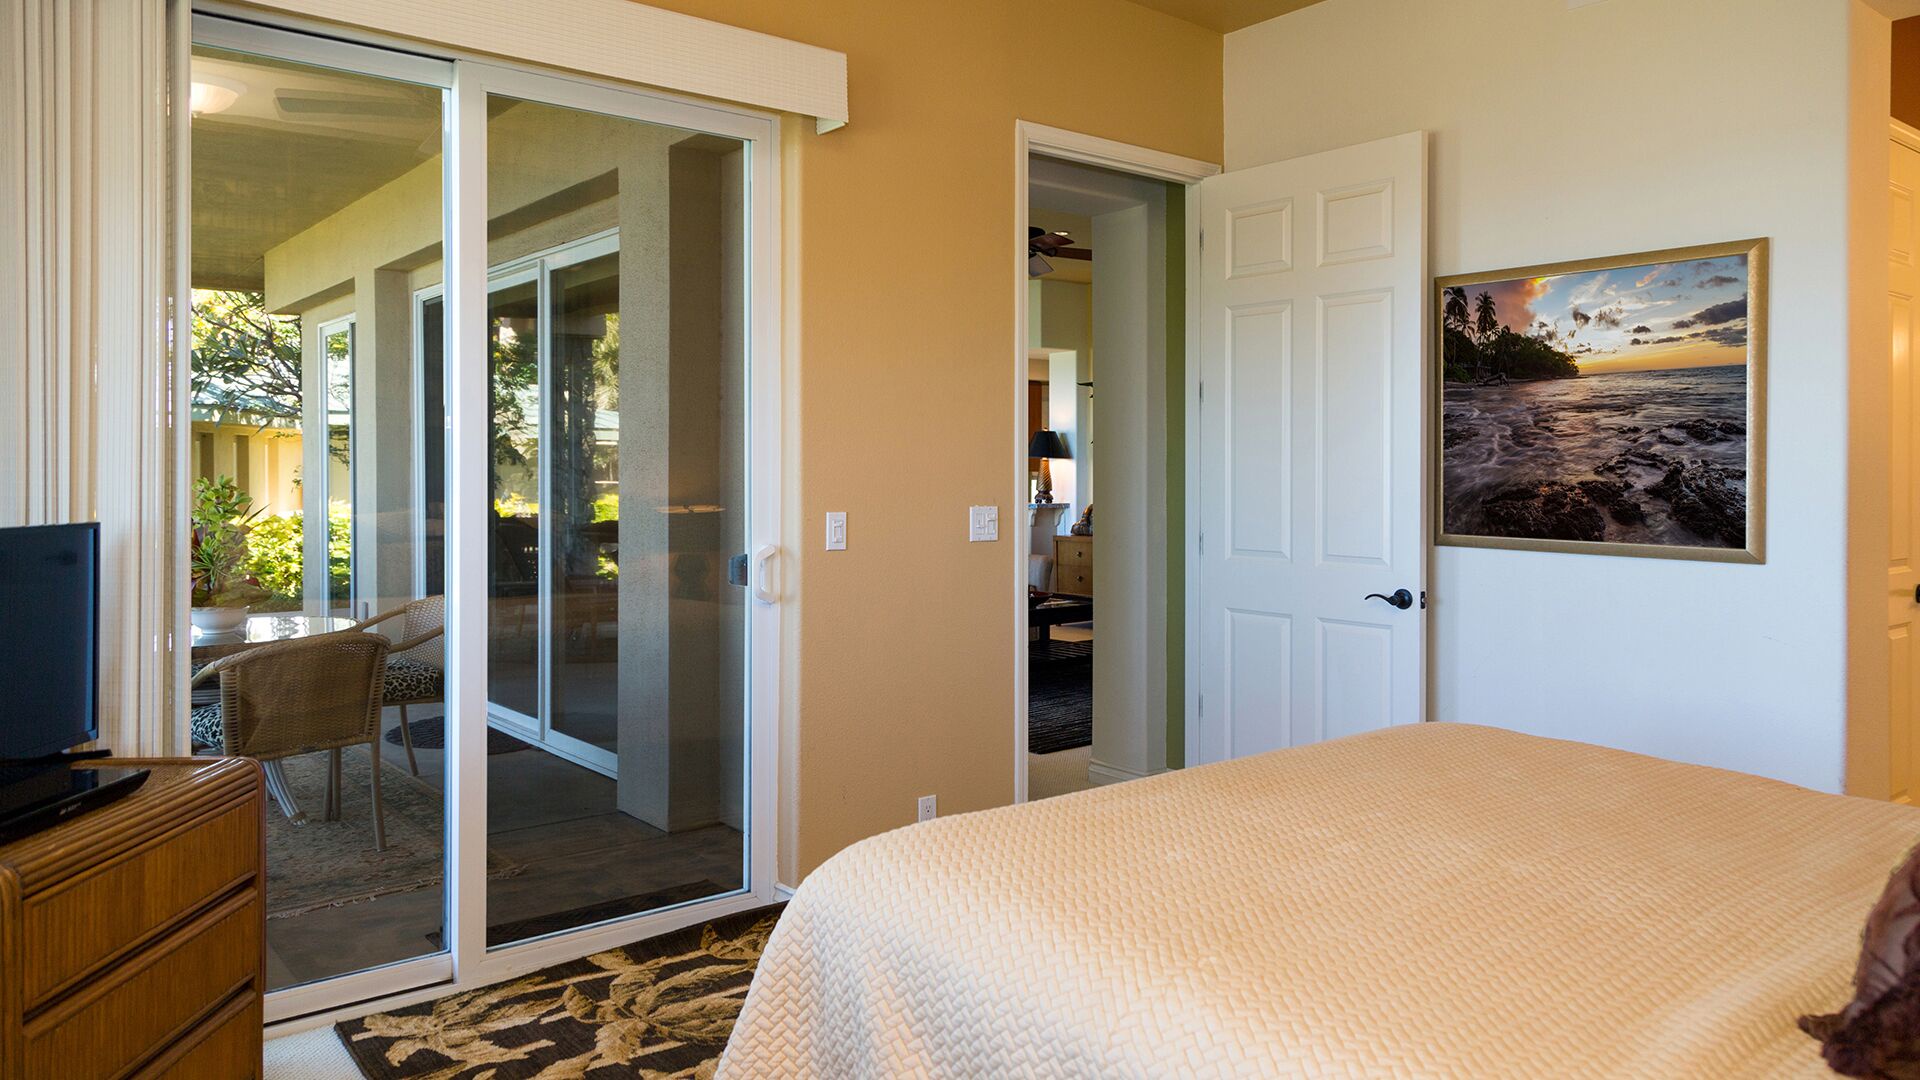 Kamuela Vacation Rentals, Kumulani I-1 - The Master Bedroom has it's own private entrance to the lanai.